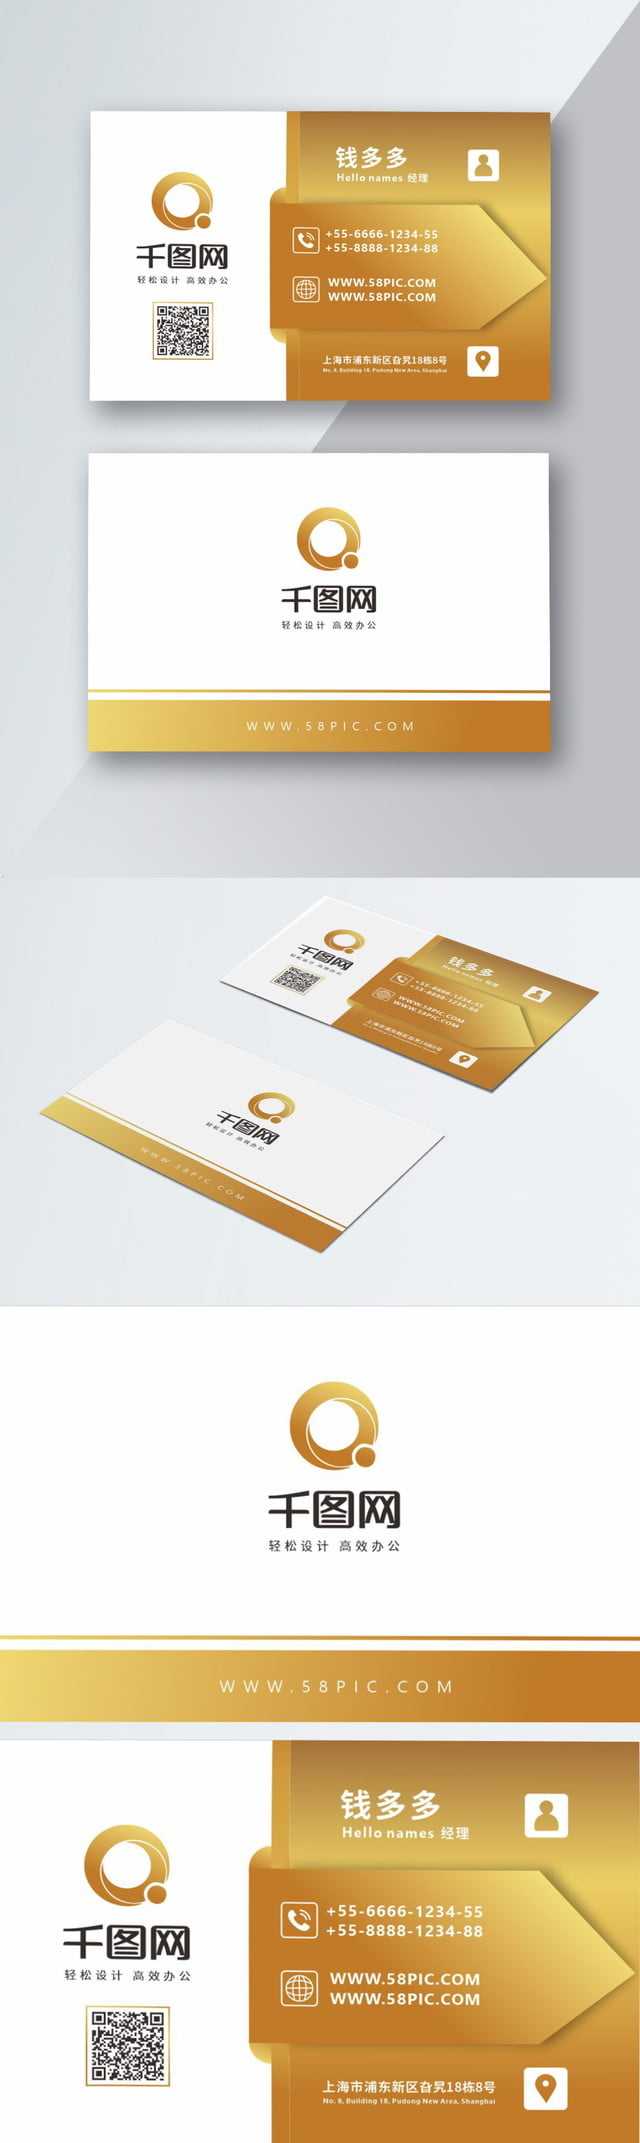 Hotel Business Card Vector Material Hotel Business Card In Download Visiting Card Templates